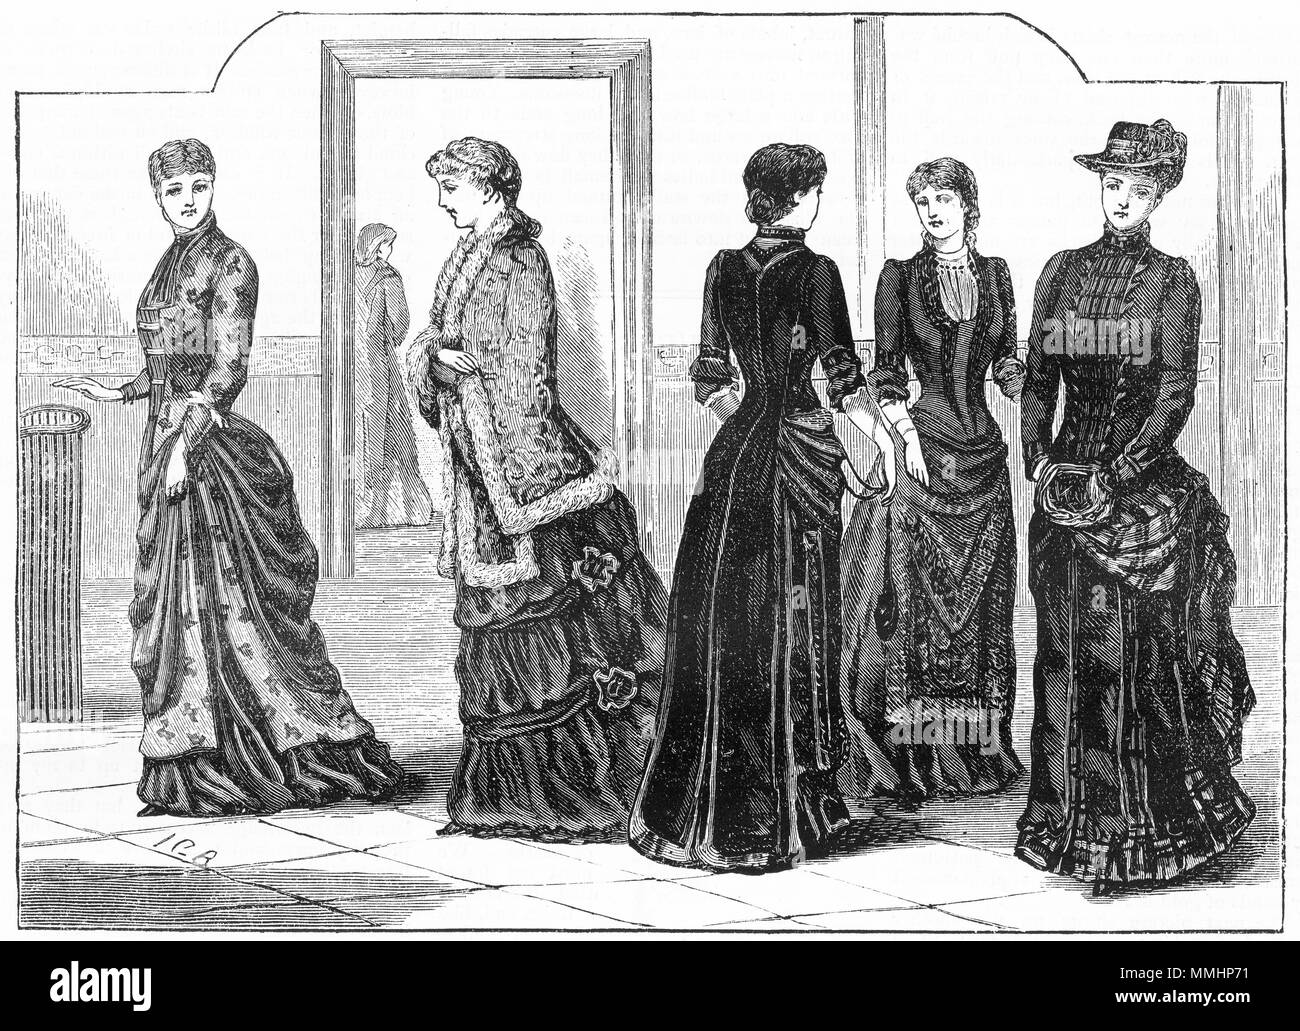 Engraving of the winter fashions for 1883. From an original engraving in the Girl's Own Paper magazine 1882. Stock Photo